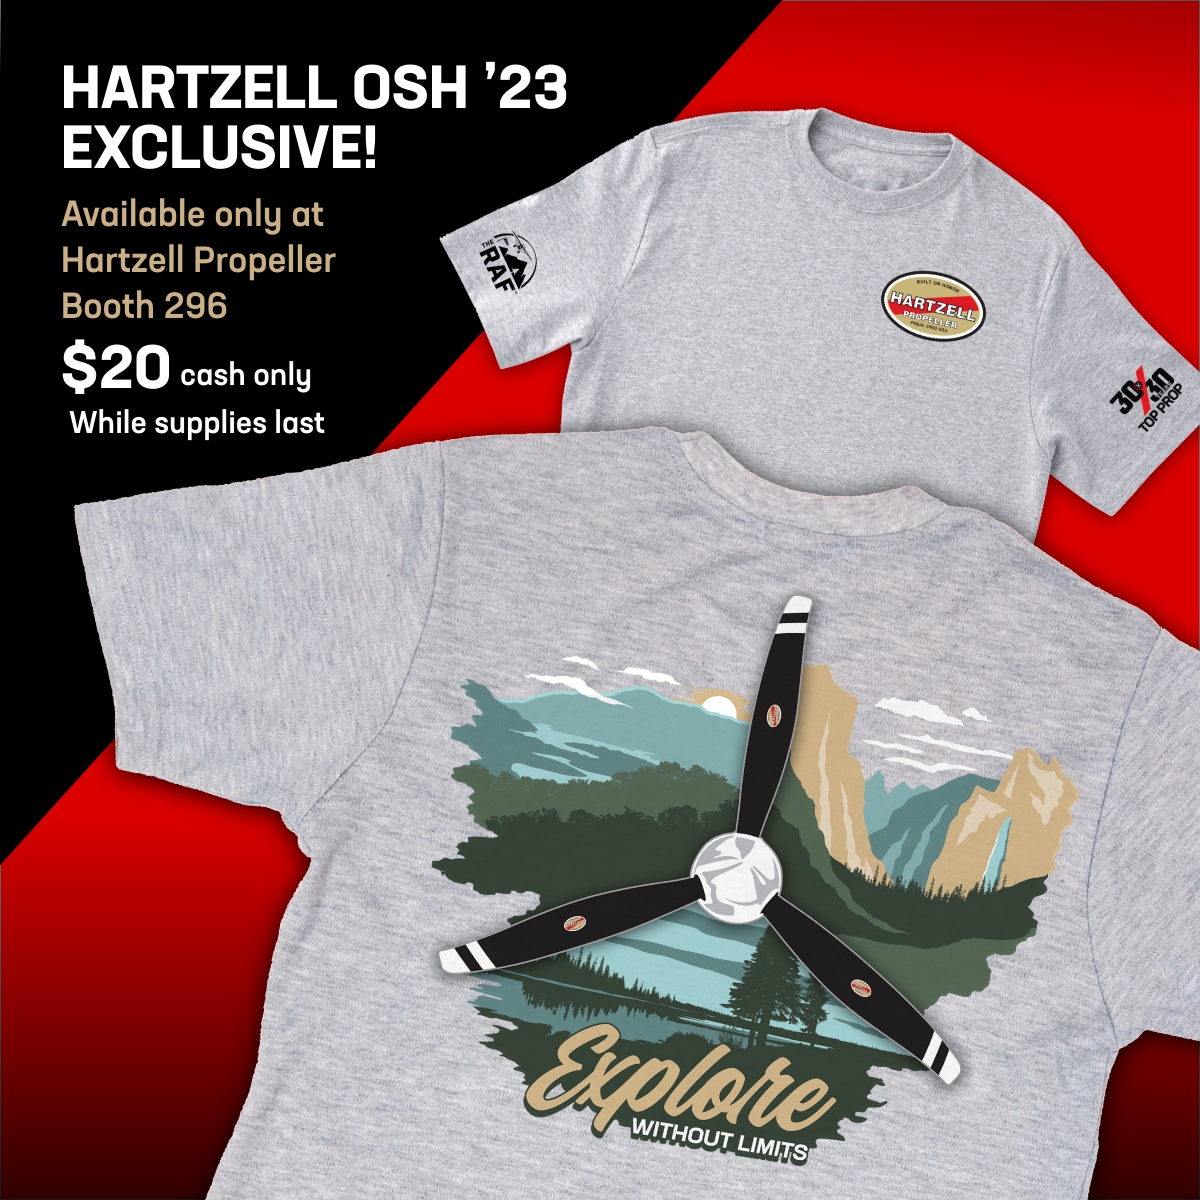 Flight Gear Merch Store - Hartzell OSH '23 Exclusive! Available only at Hartzell Propeller Booth 296 $20 cash only while supplies last